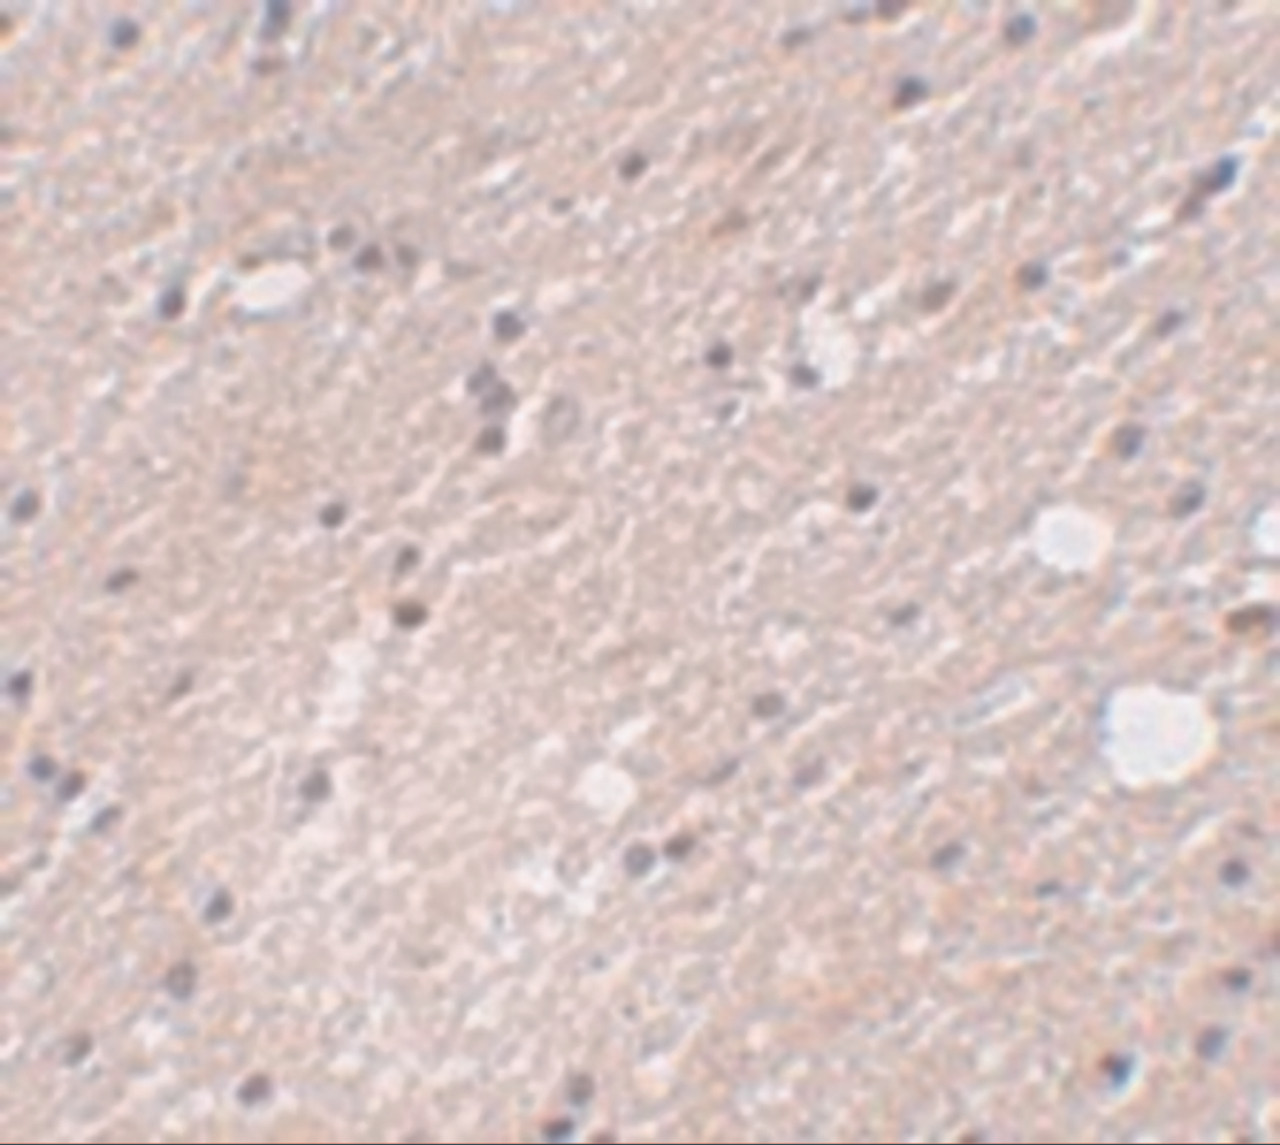 Immunohistochemistry of FRMPD4 in human brain tissue with FRMPD4 antibody at 5 ug/mL.